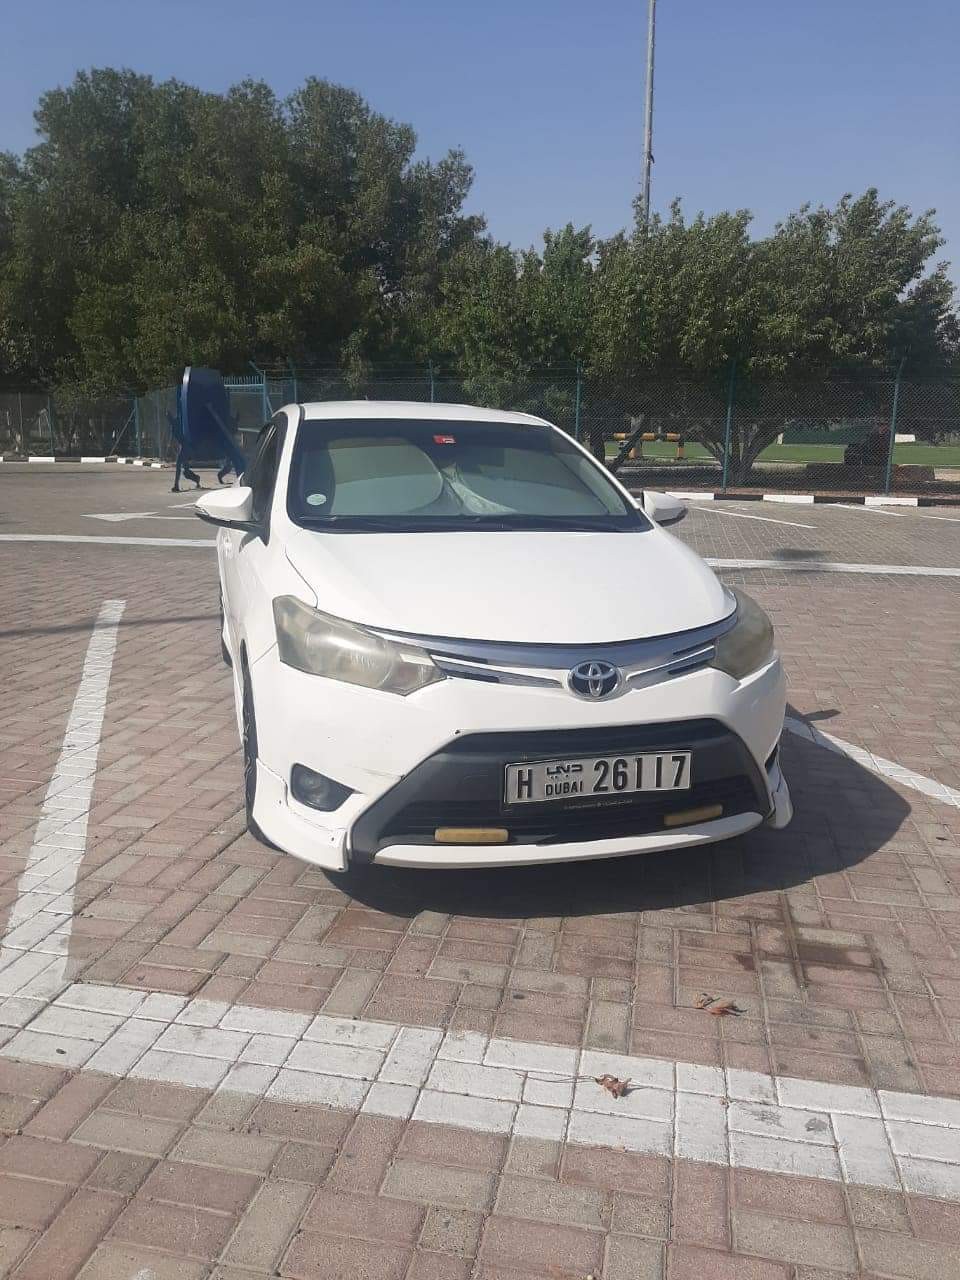 Well-Maintained 2014 Toyota Yaris Offered at Excellent Value